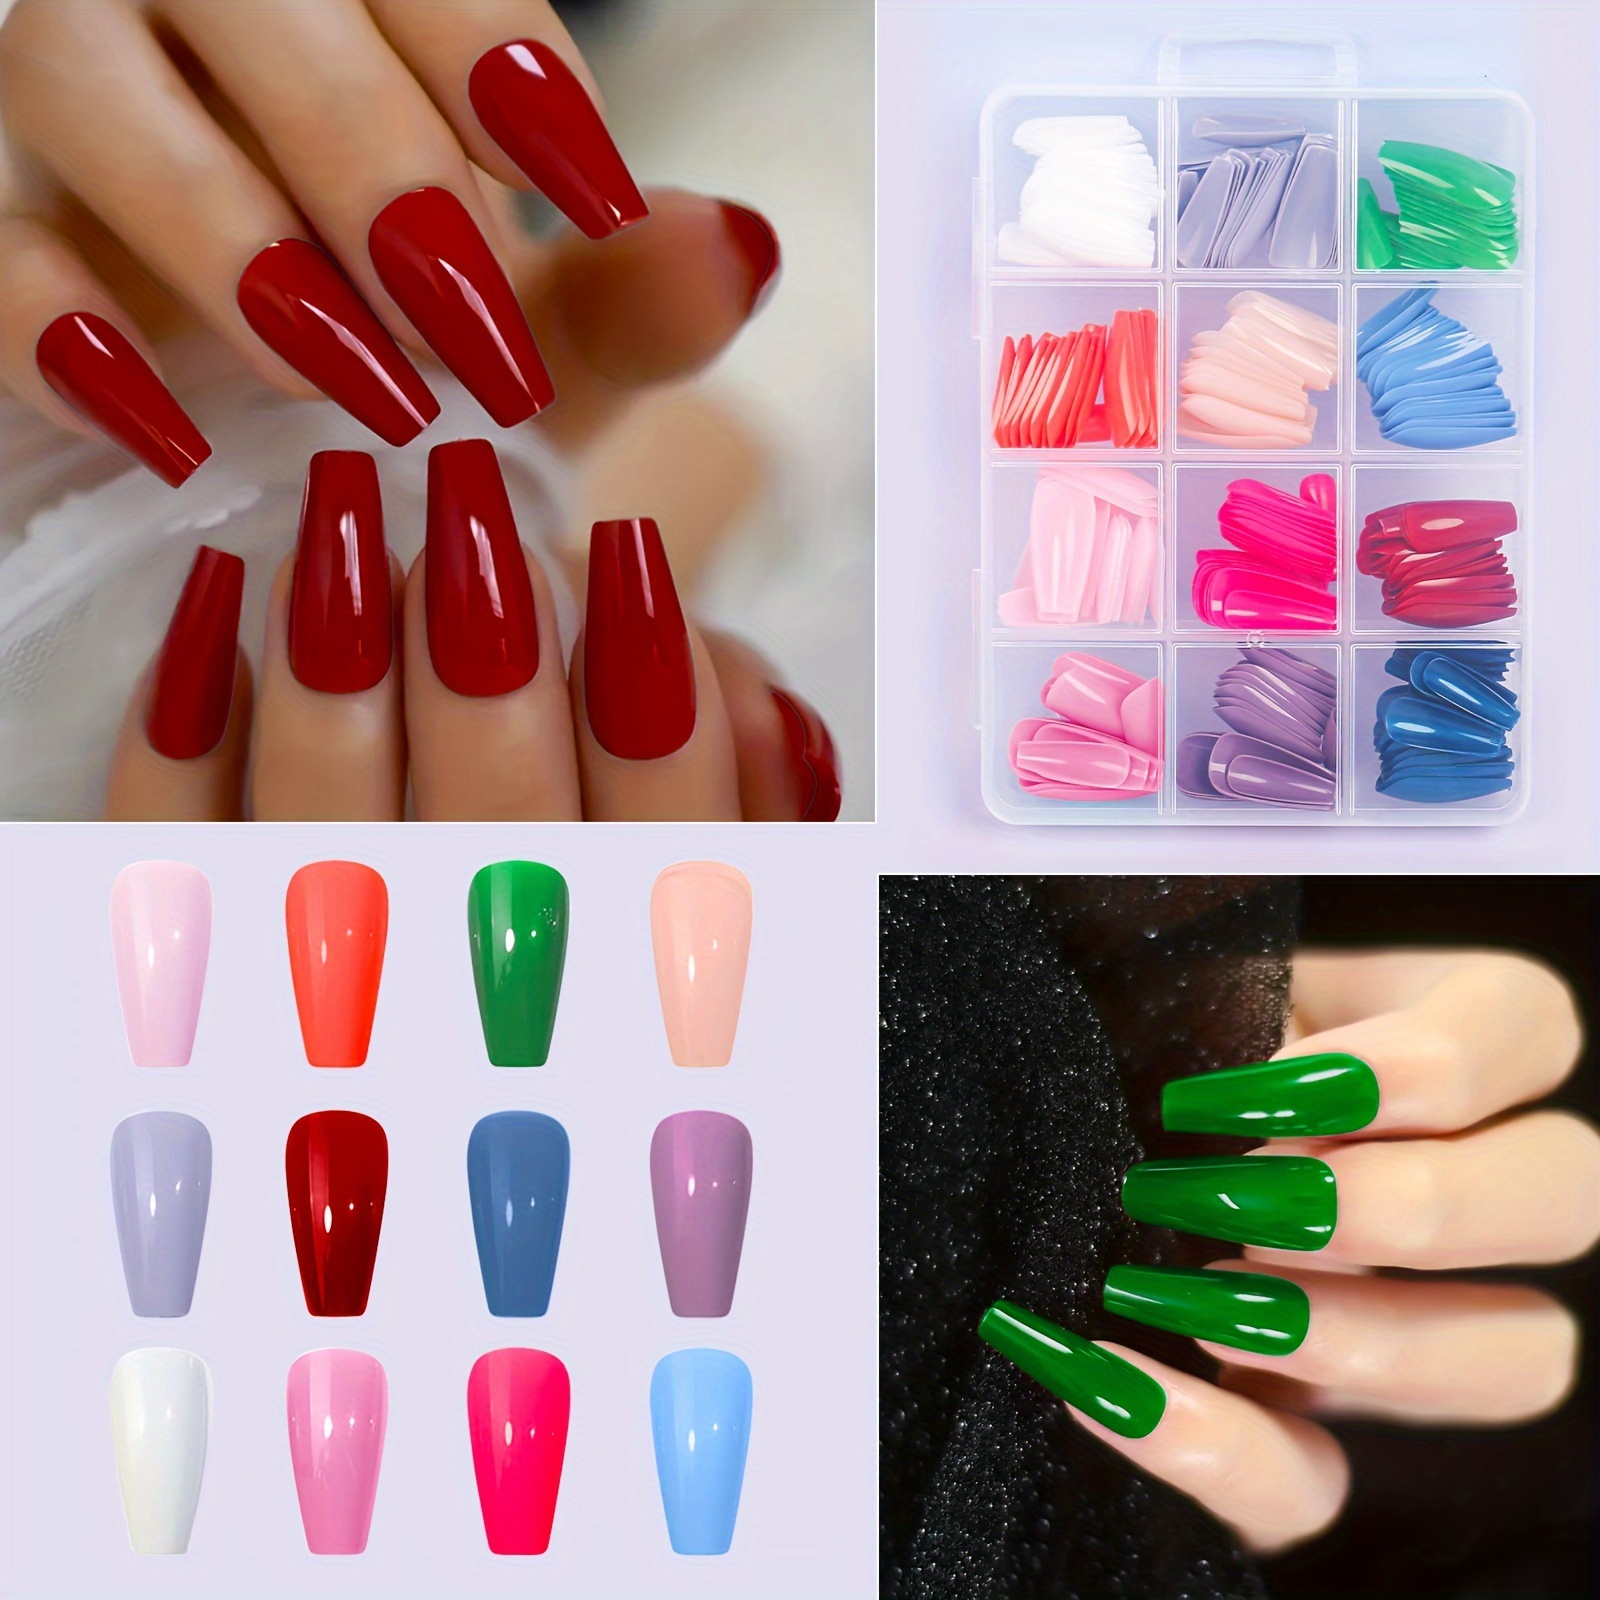 

12 Colors (288pcs) Medium Ballet Shape False Nails Glossy Solid Color Press On Nails For Women And Girls - Diy Manicure